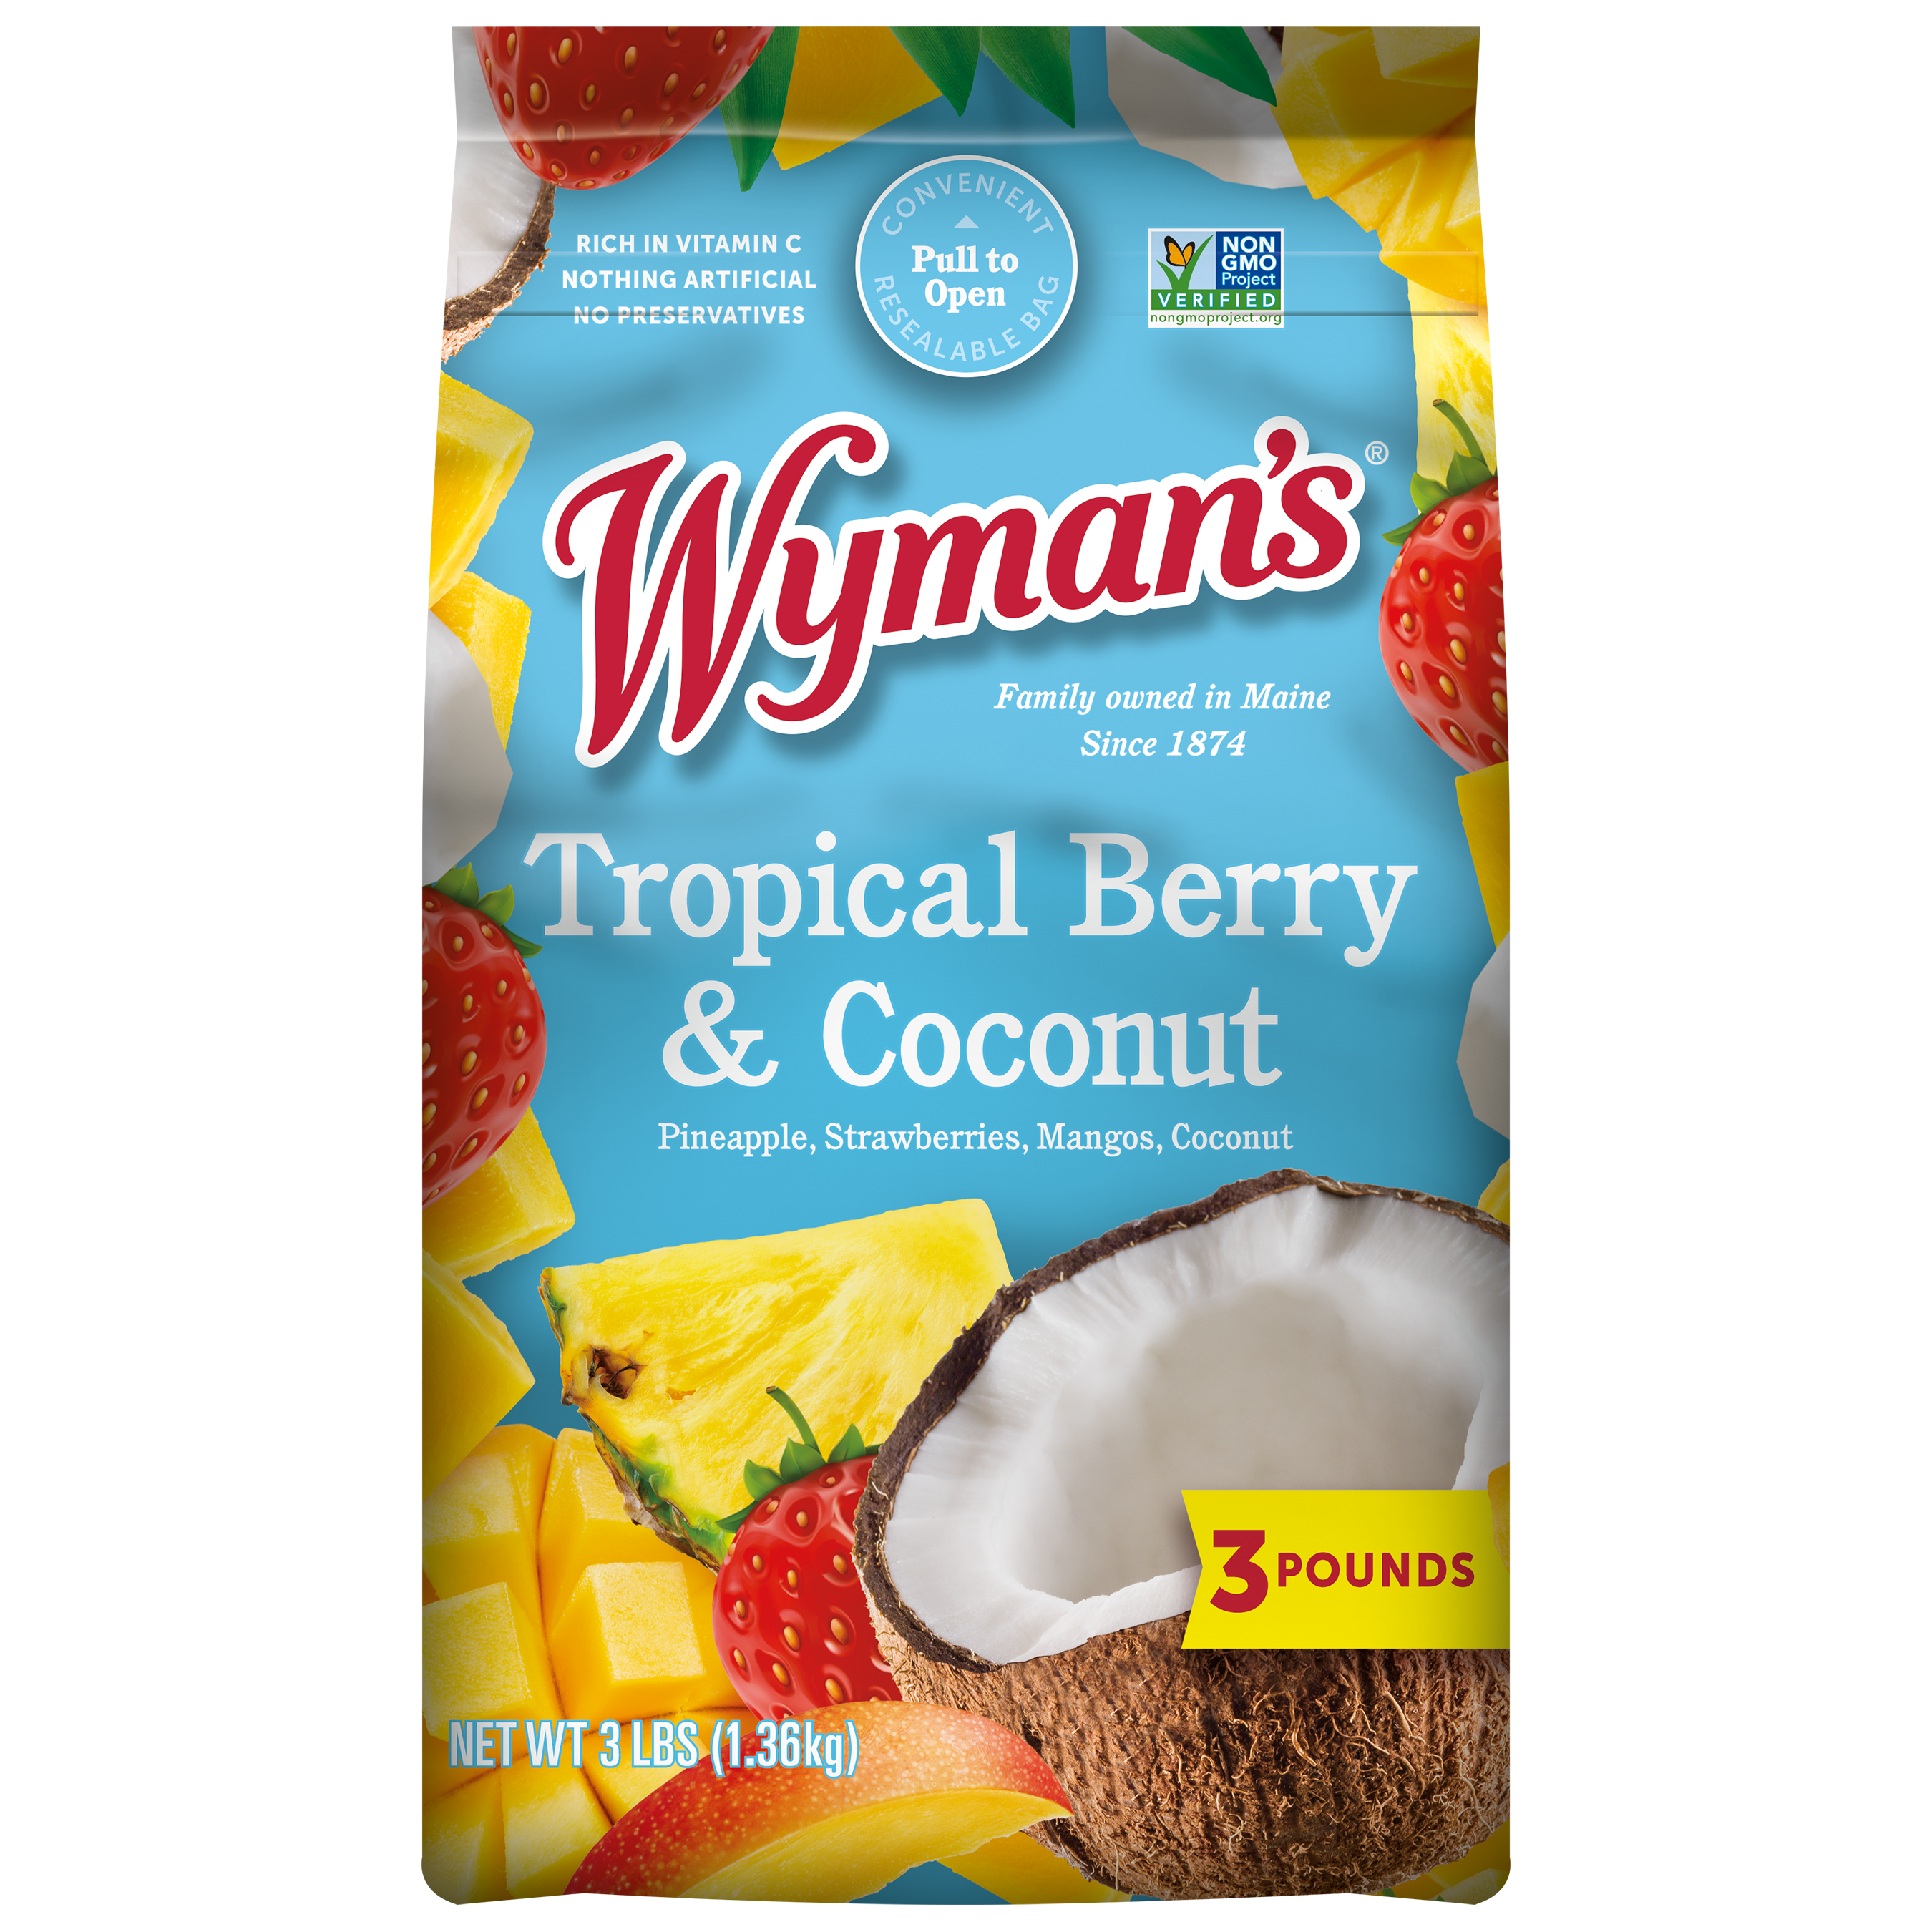 Tropical Berry & Coconut